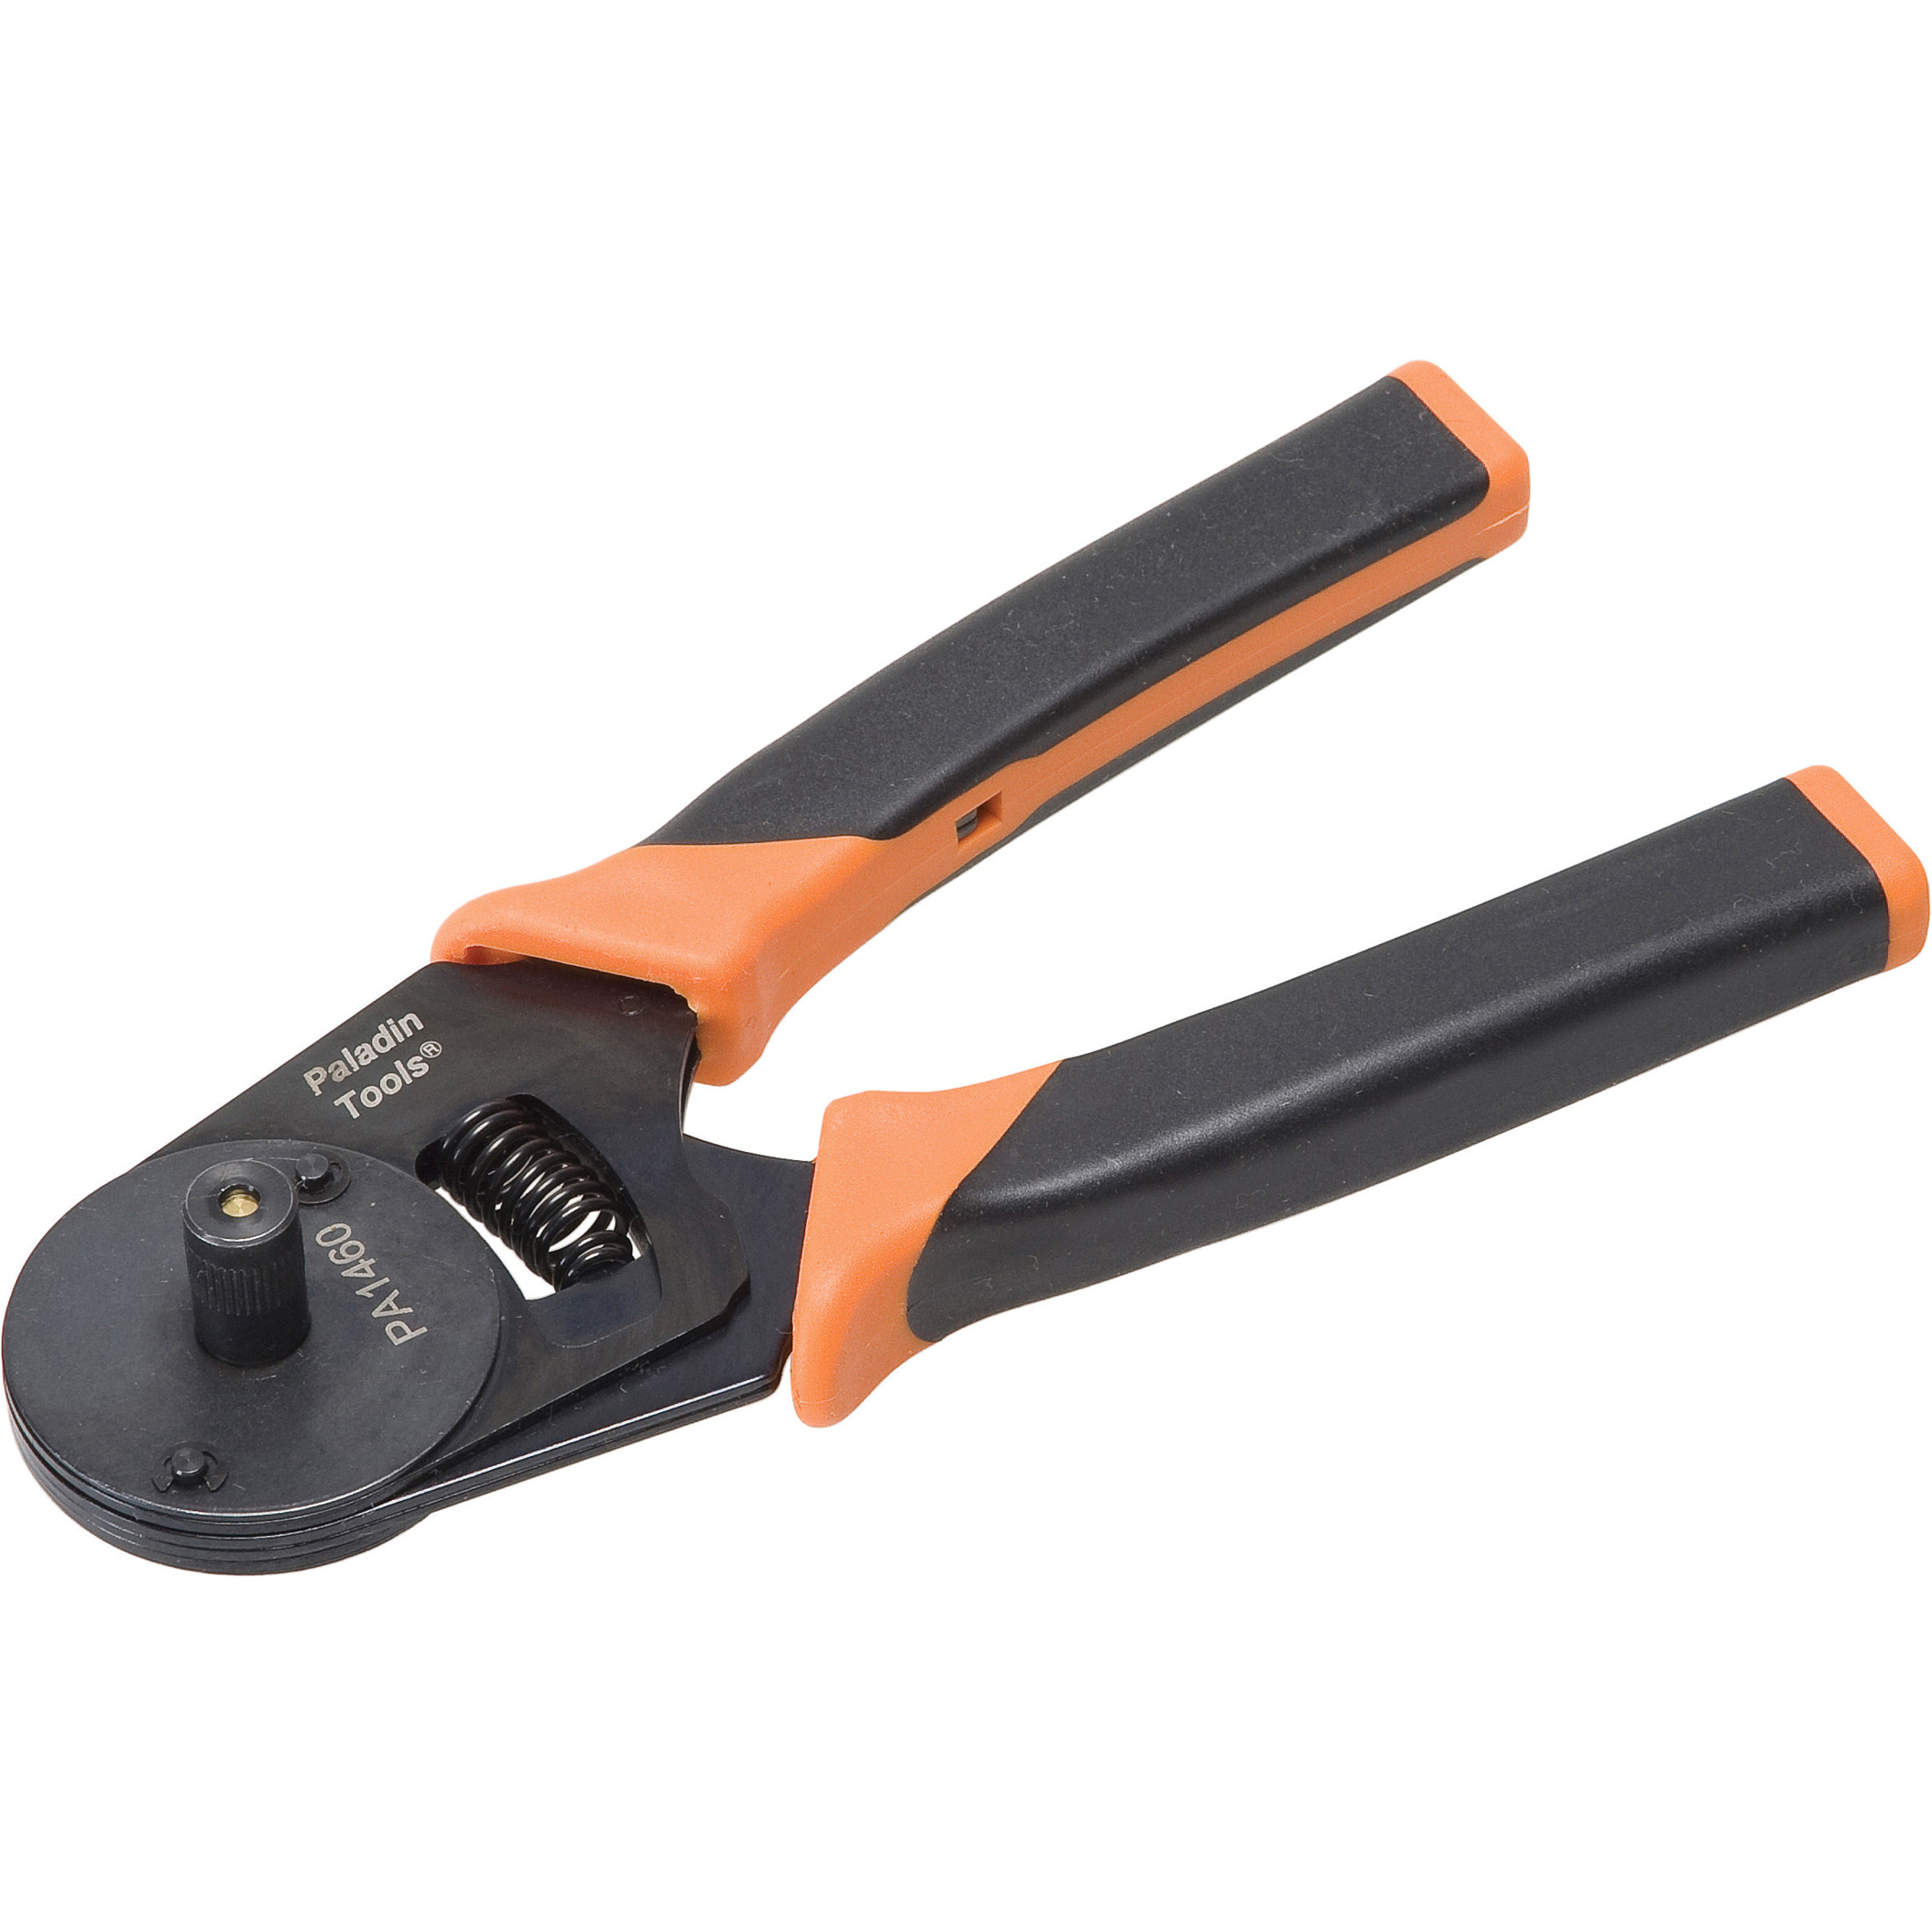 Paladin Tools D-sub 4 Indent Crimping Tool - image 1 of 6